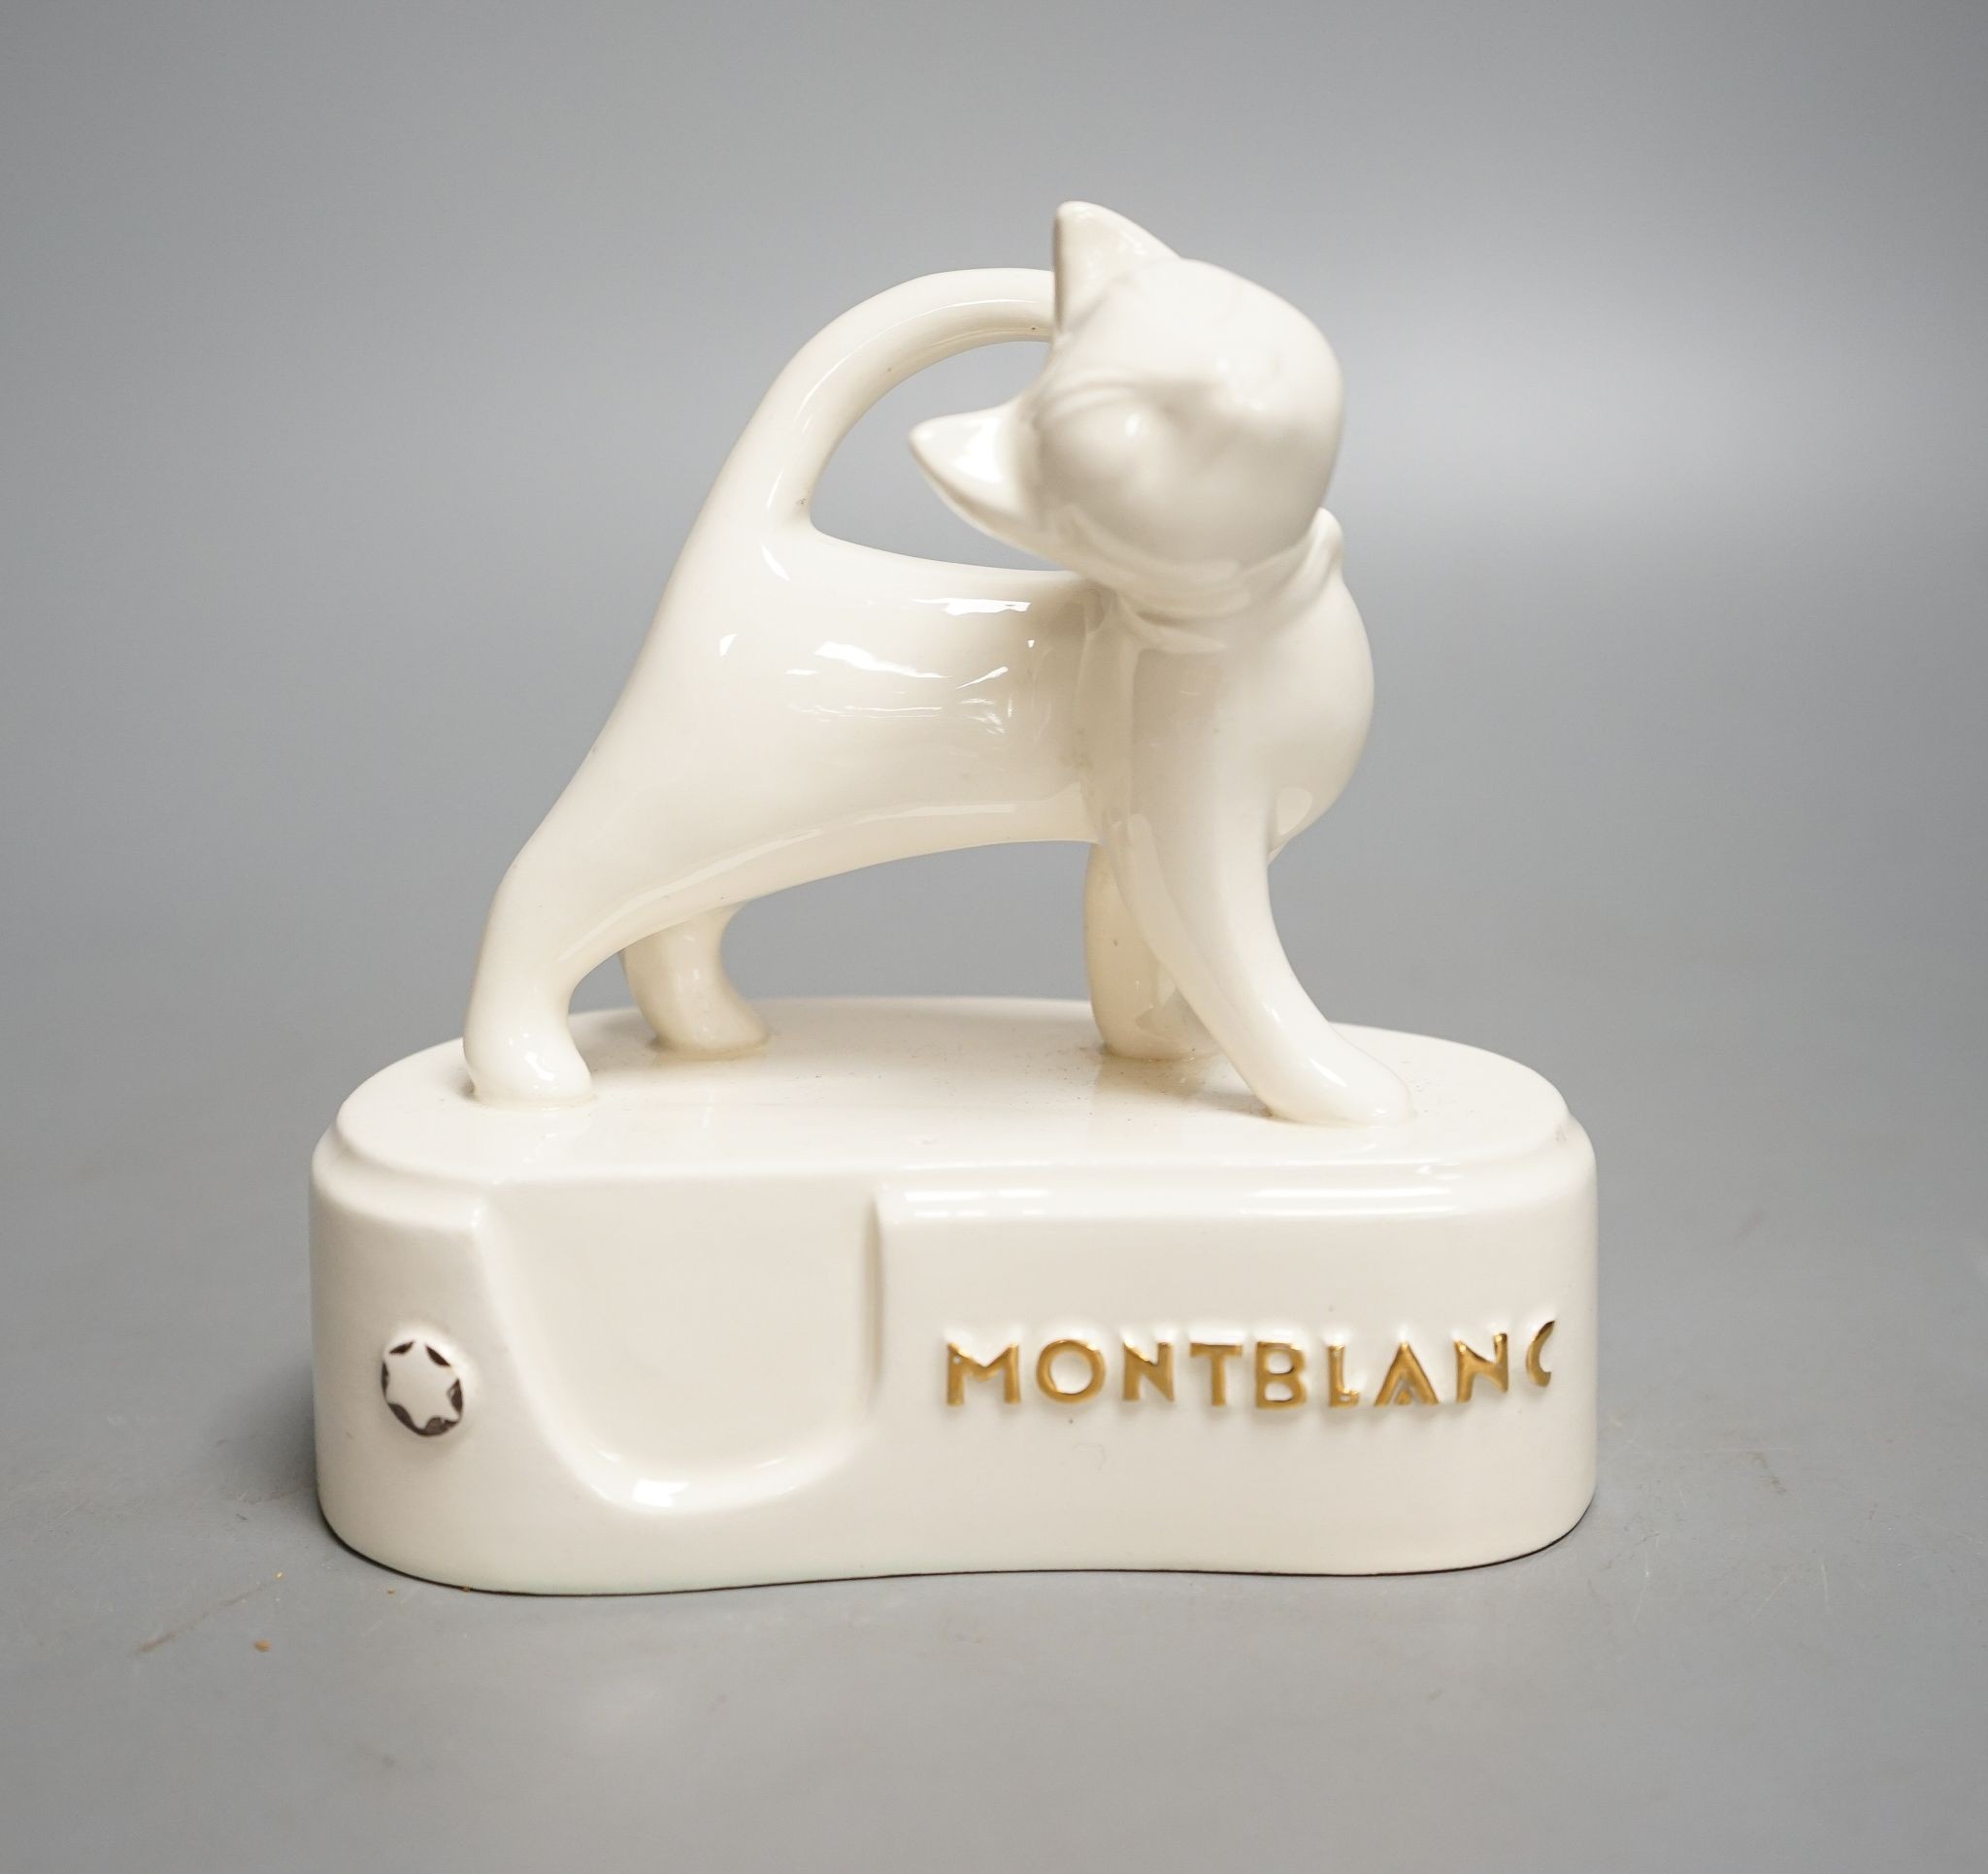 A rare Montblanc advertising display pottery 